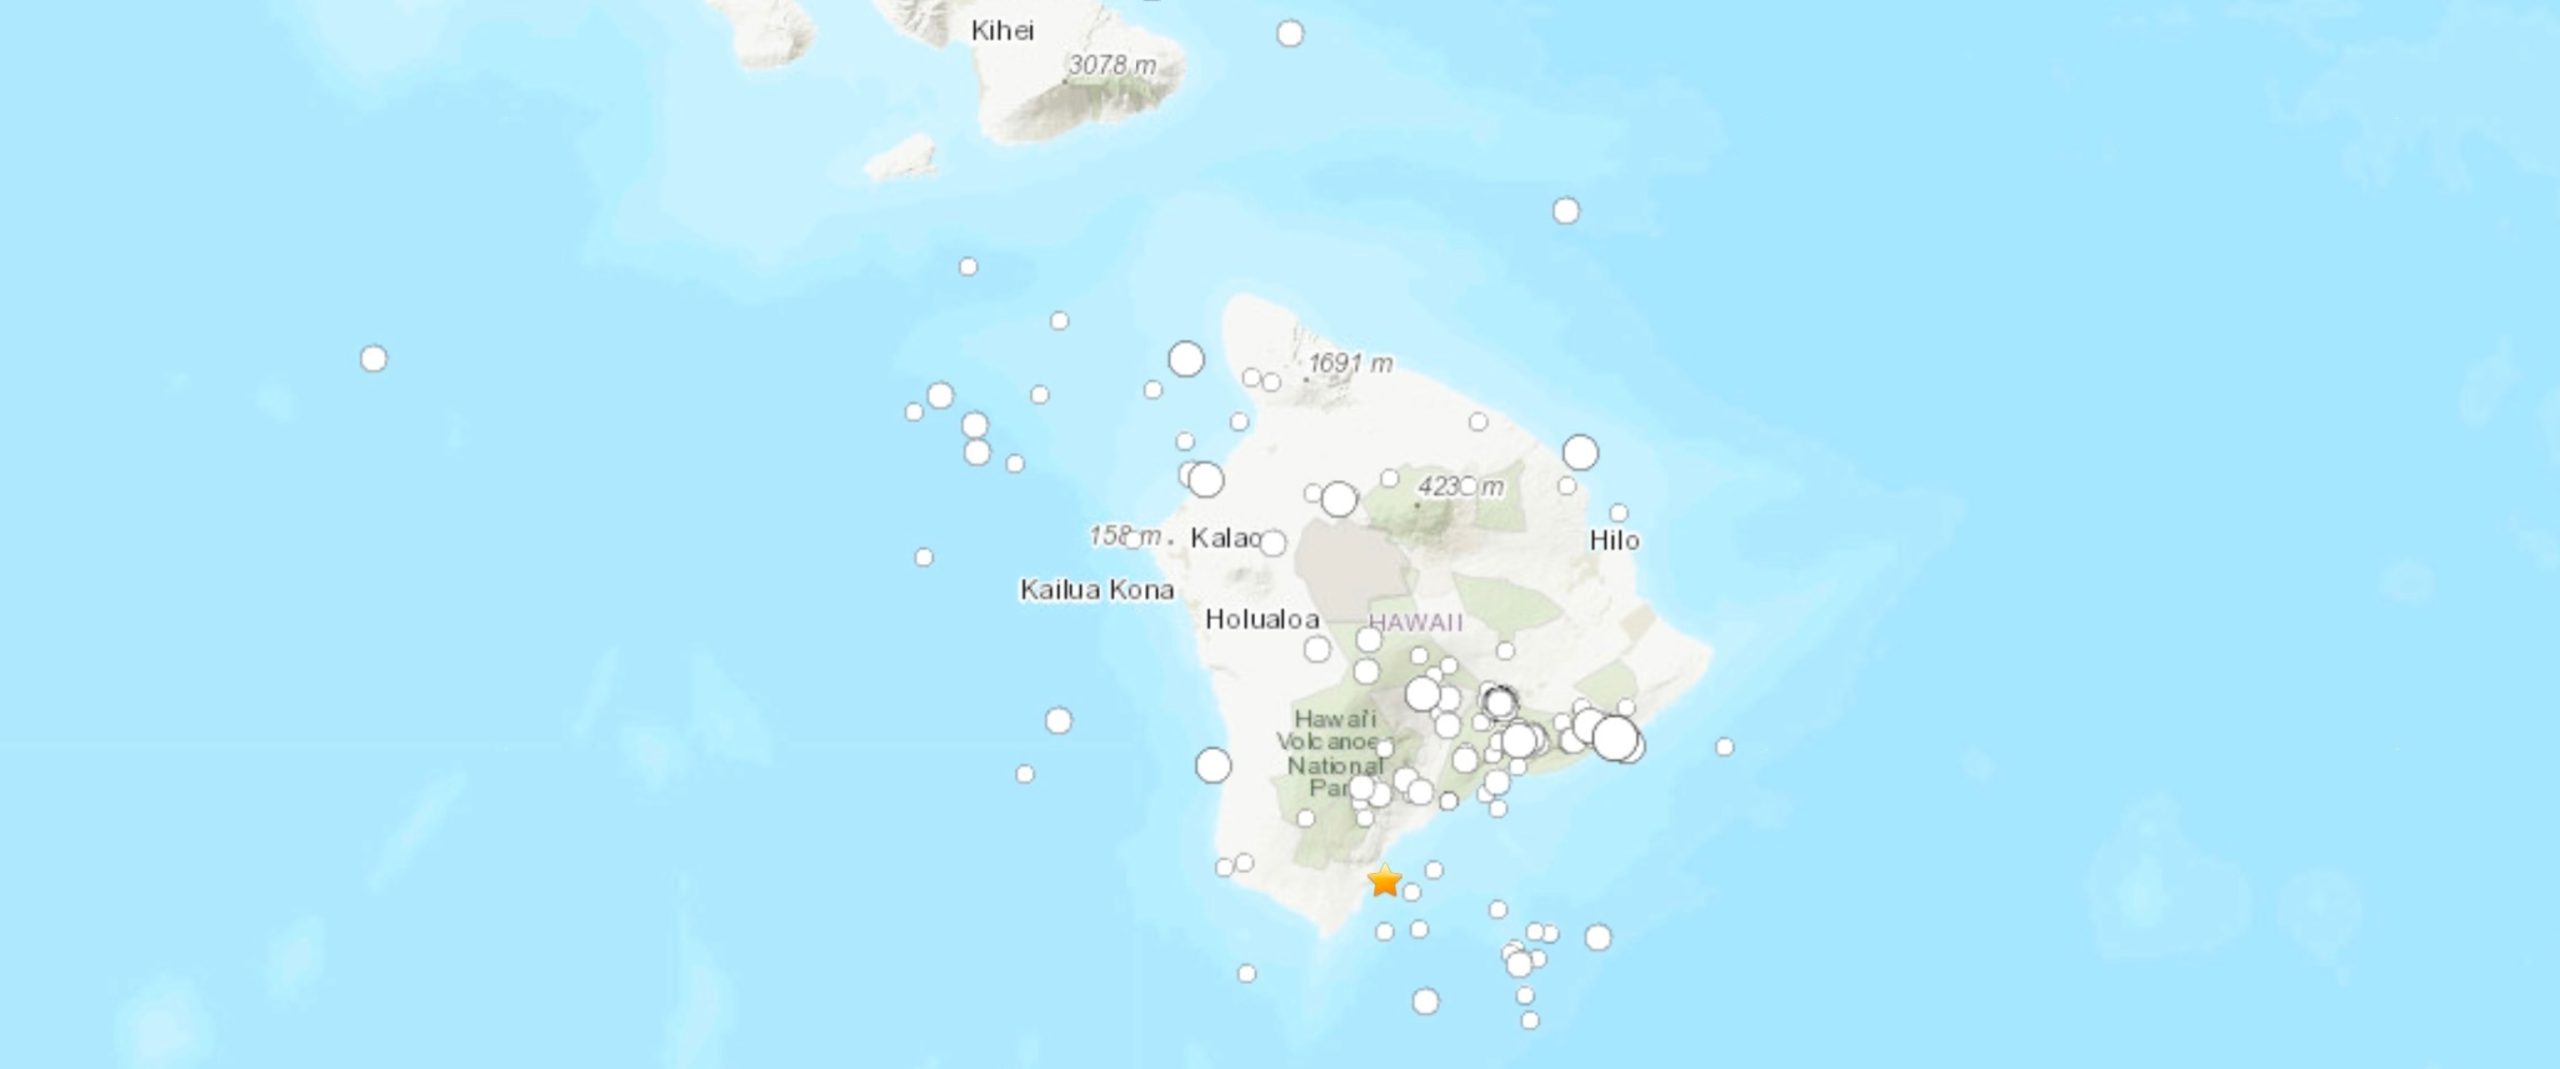 Significant Earthquake Strikes Hawaii's Big Island, Causing Intense Shaking Across Multiple Regions